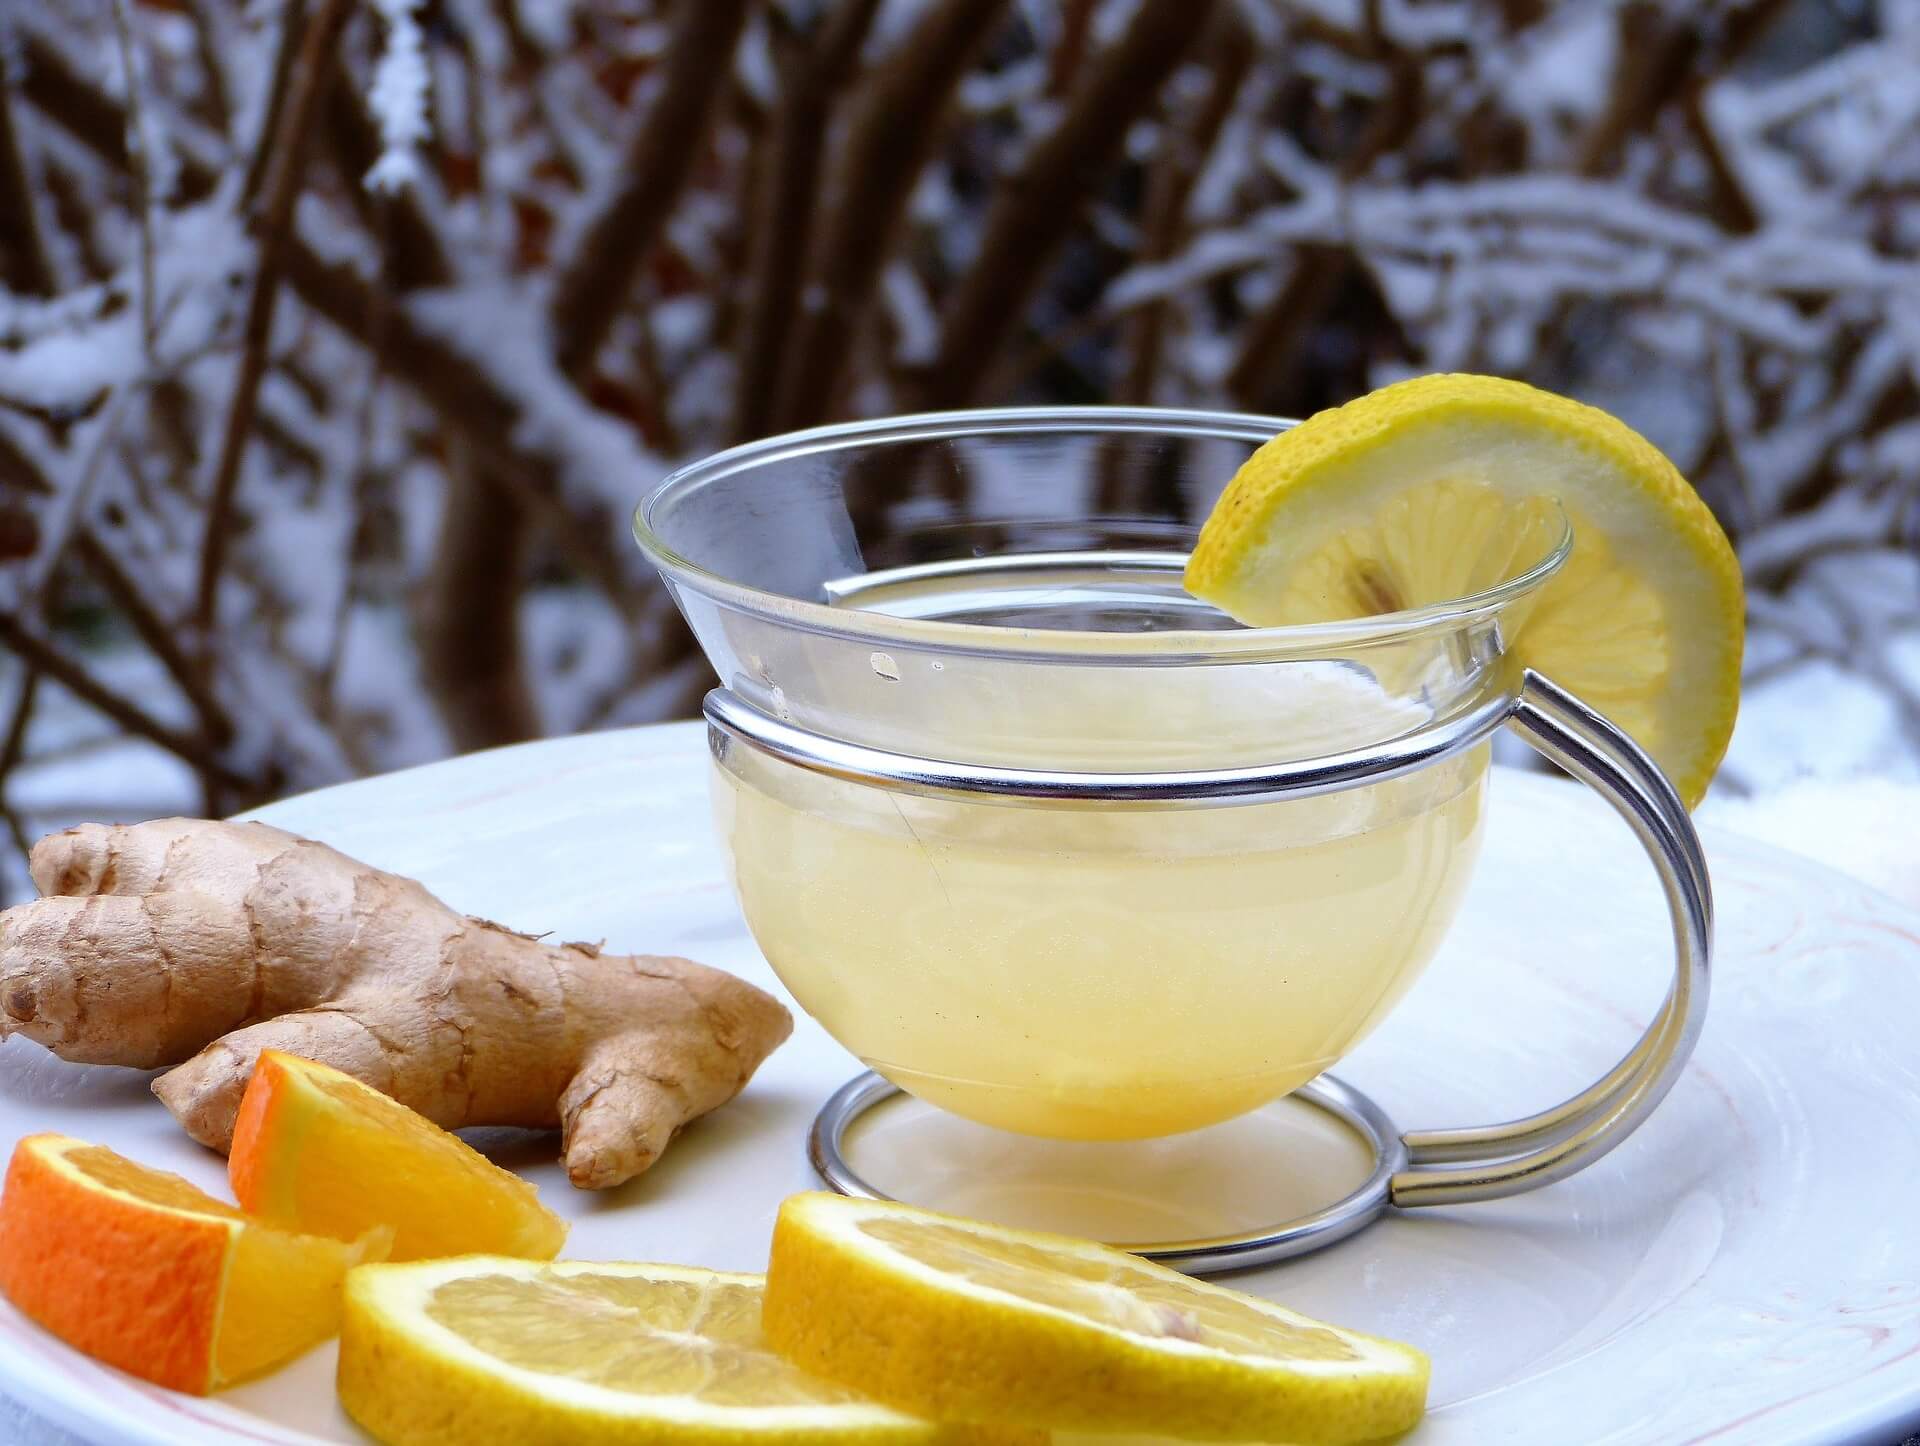 10 Ways to Boost Your Immune System During Cold and Flu Season